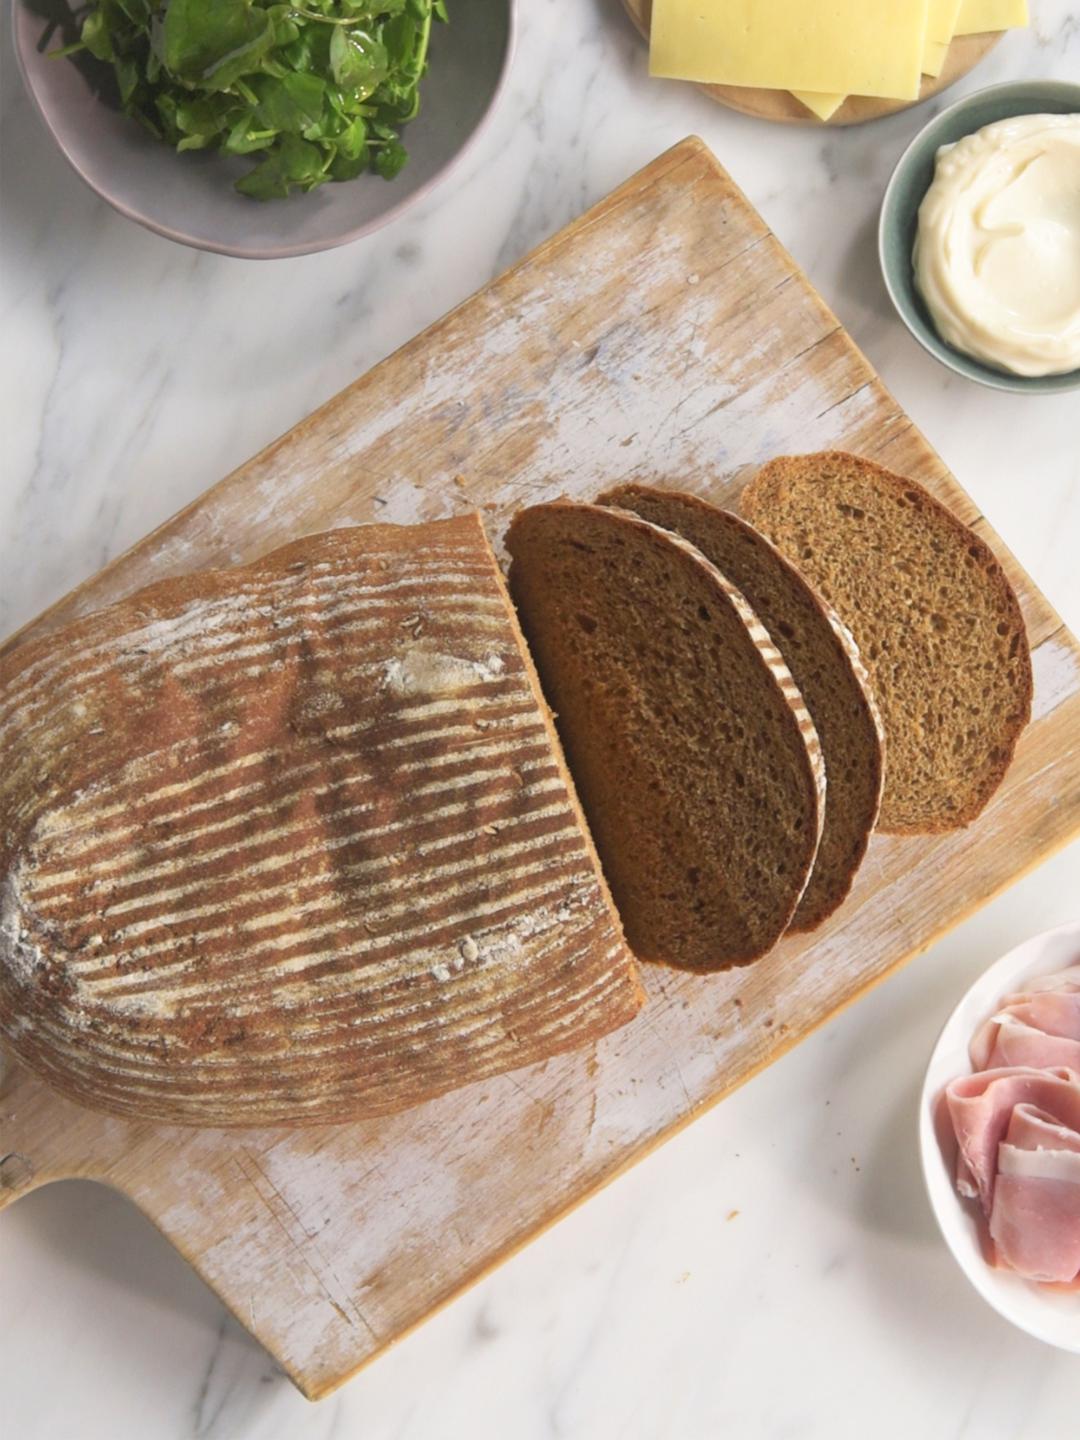 Rye and Caraway Bread